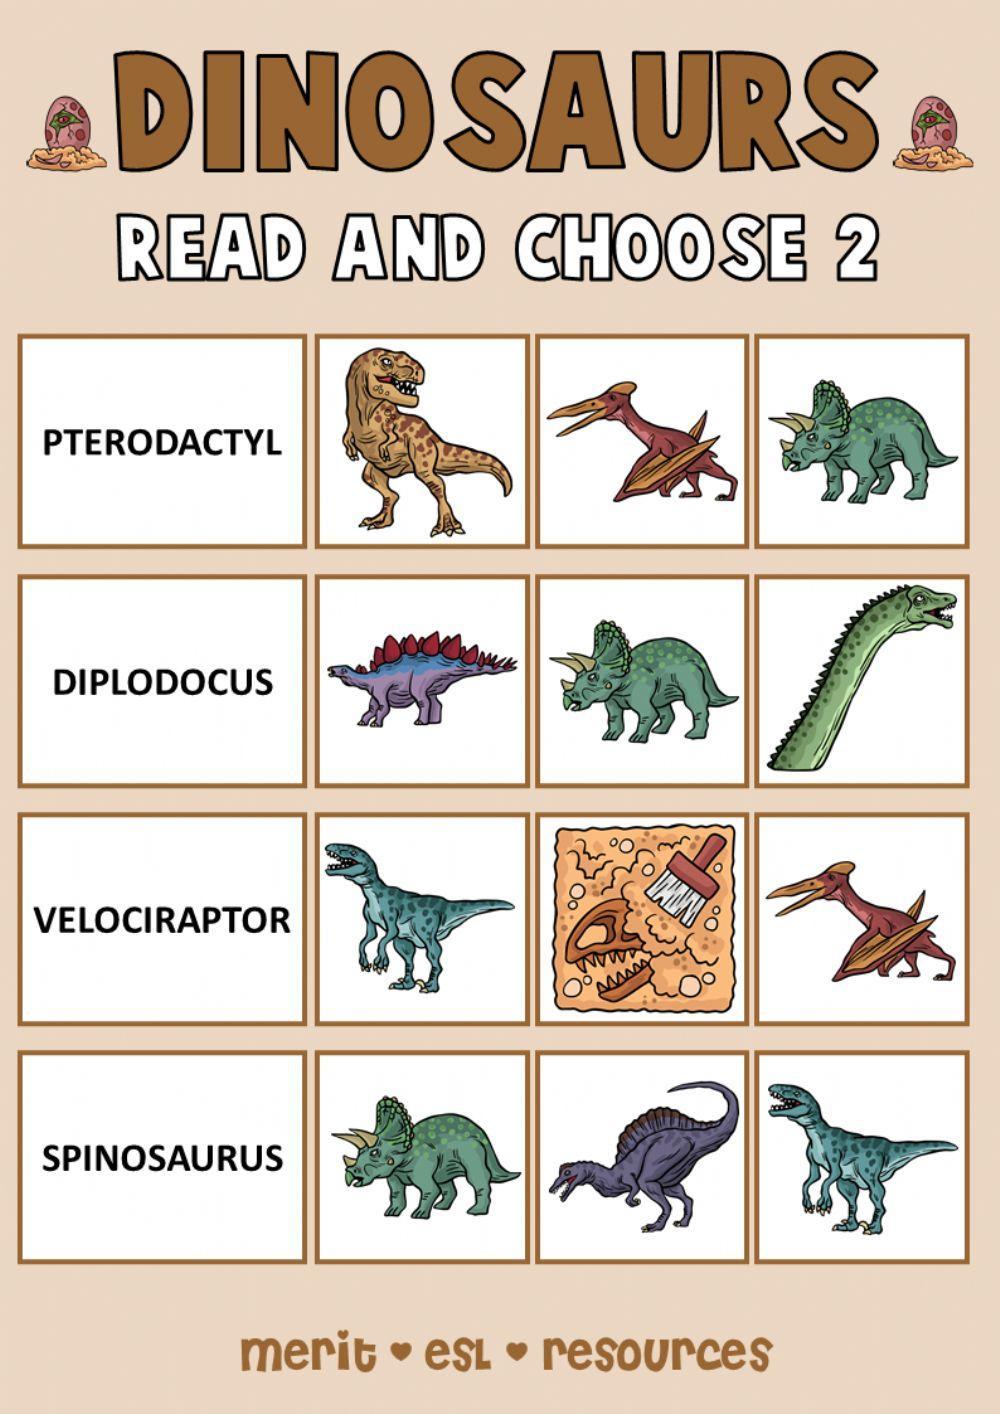 Dinosaurs - Read and choose 2